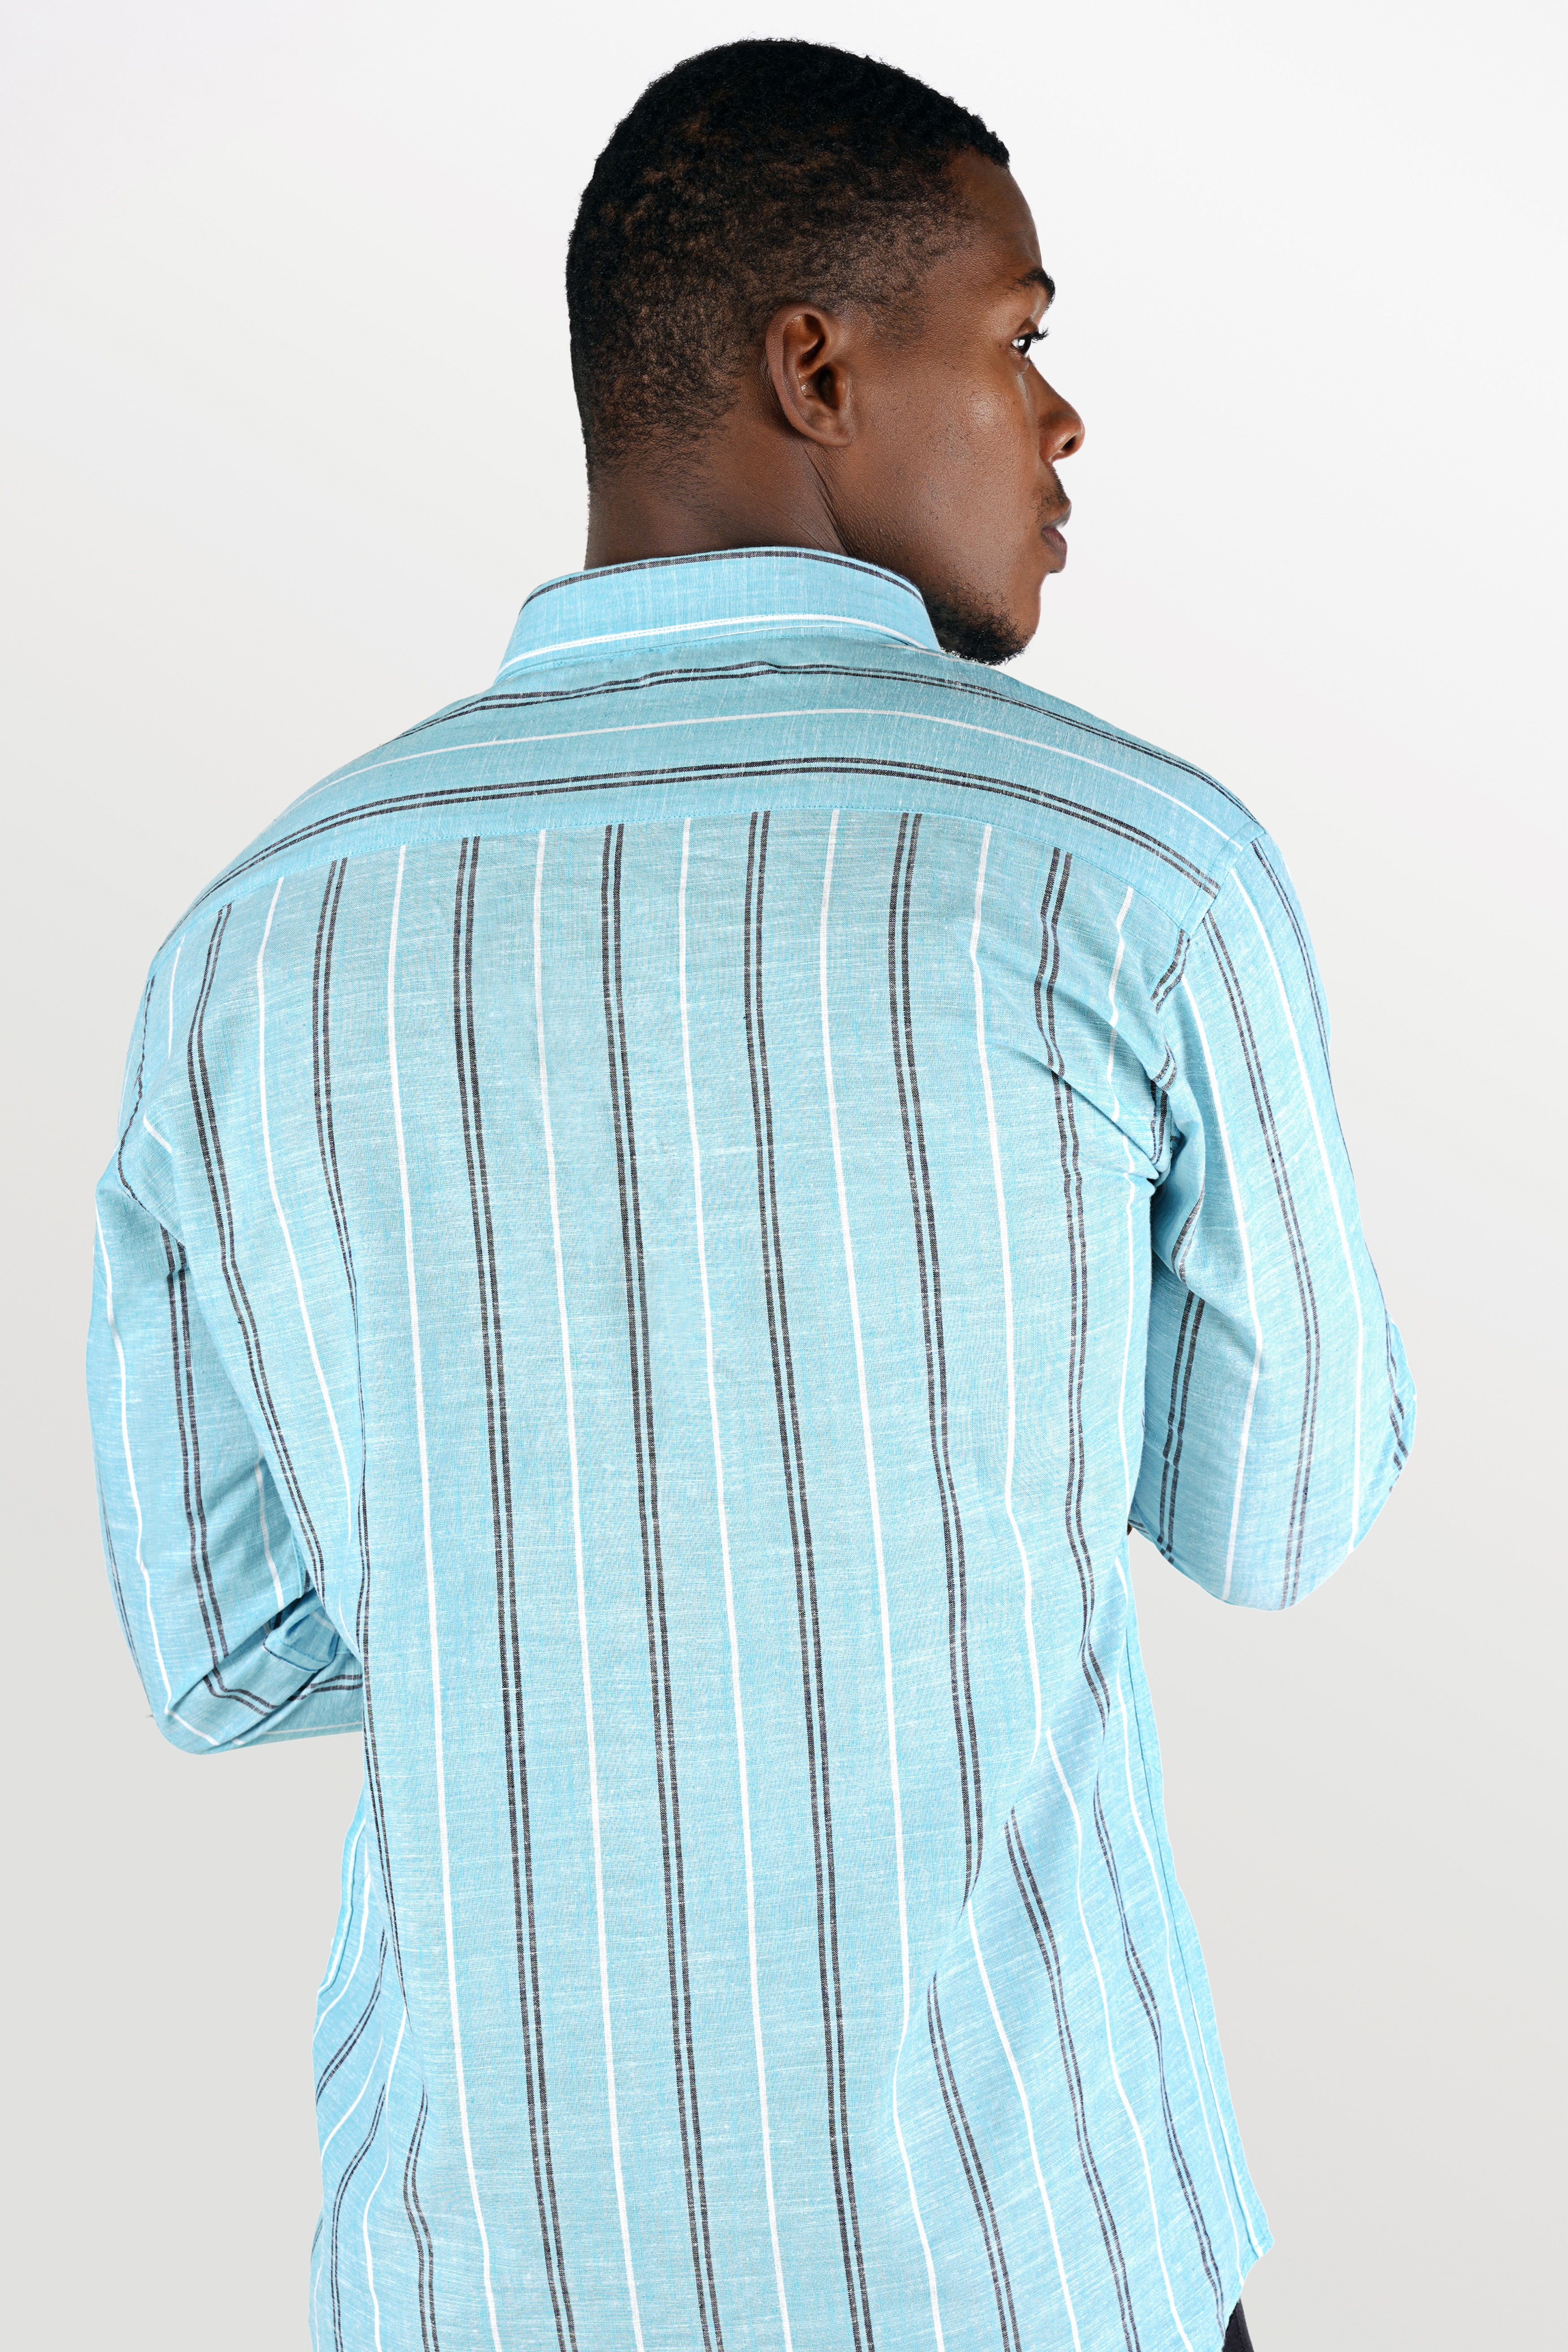 Pale Aqua Blue with Black and White Striped Luxurious Linen Shirt